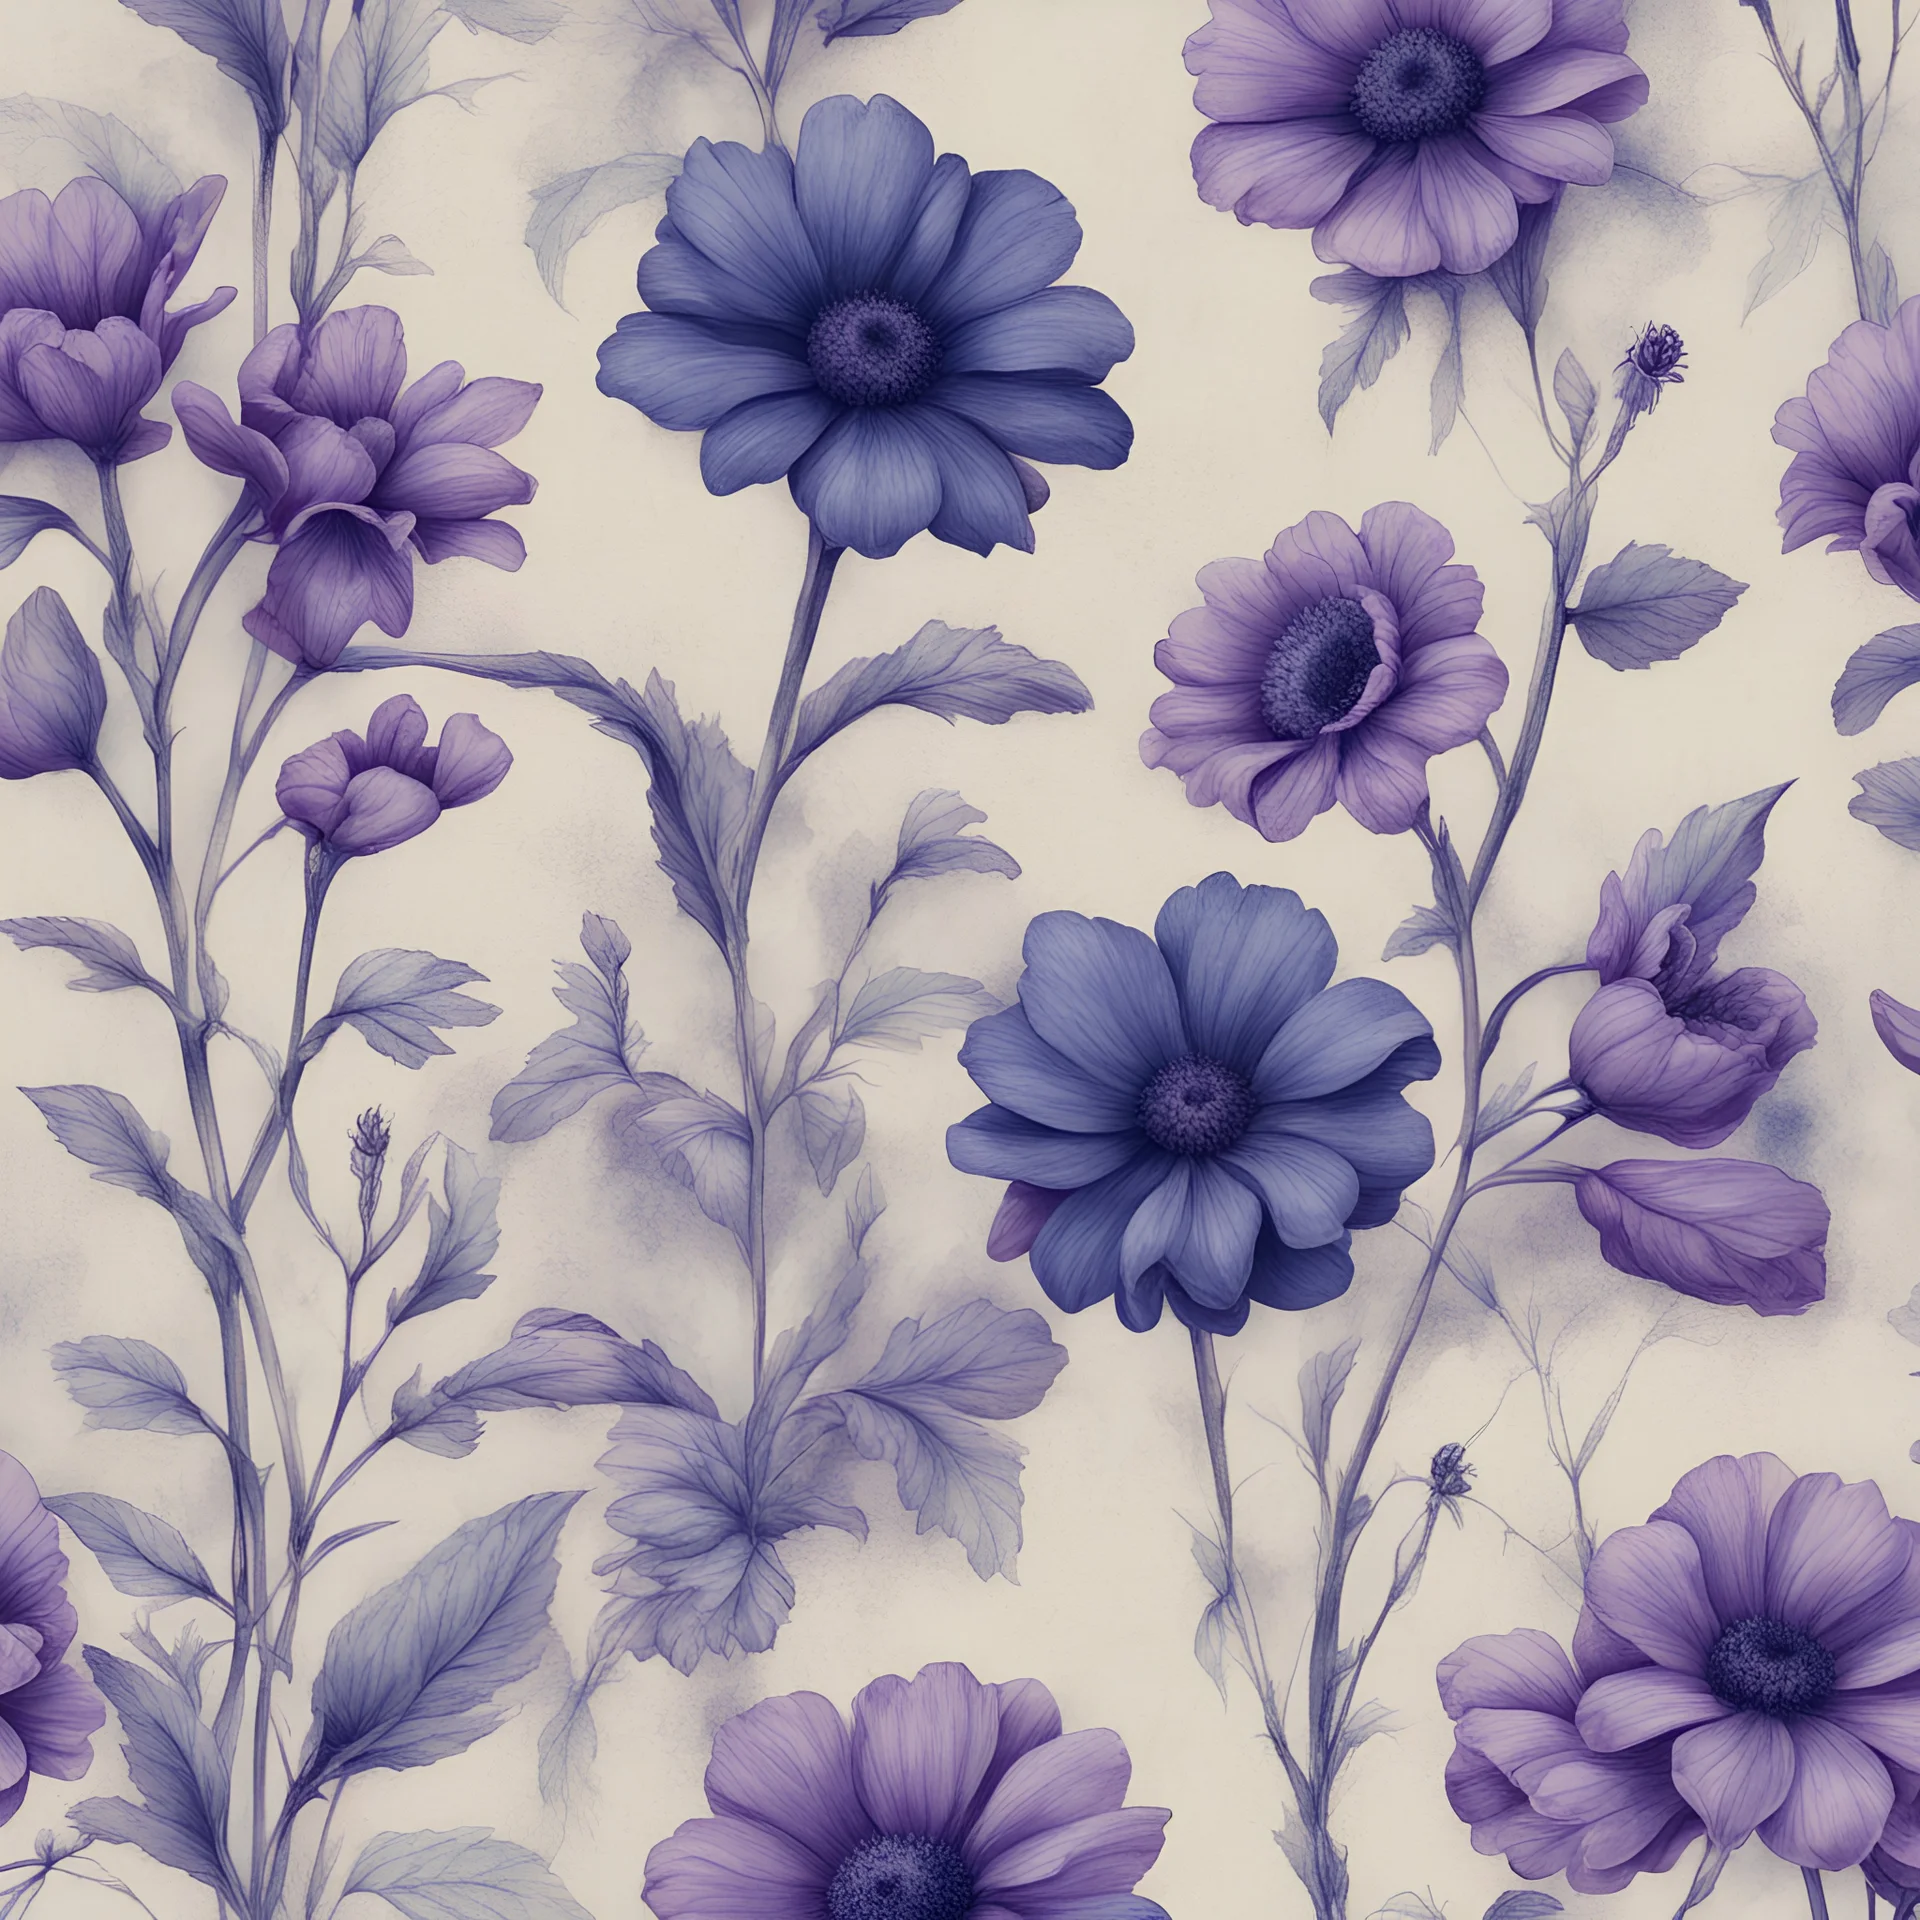 Hyper Realistic sketches of Grungy Purple & Navy-blue flowers on a light-blue-vintage-paper